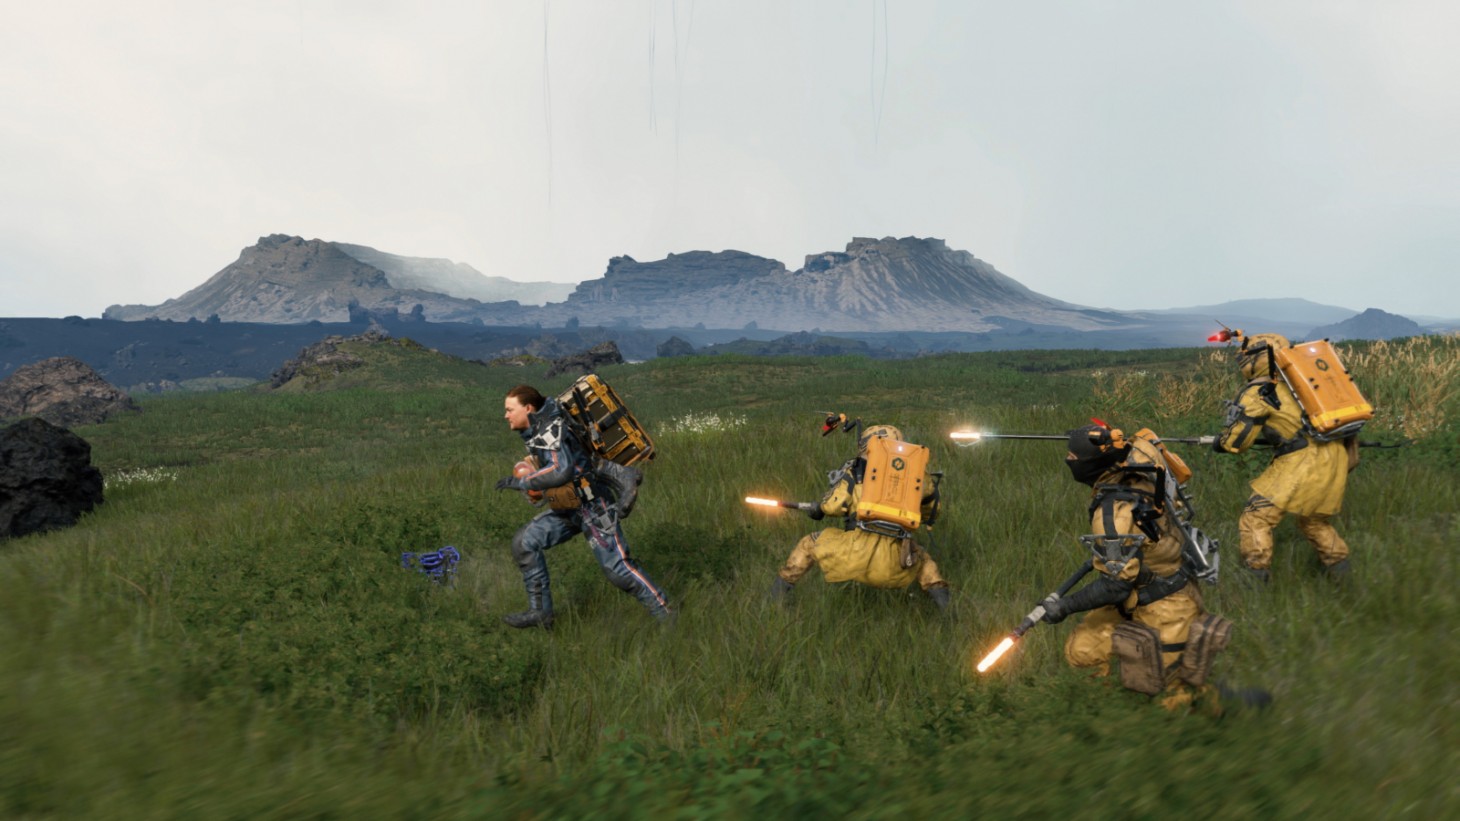 Death Stranding Director's Cut' will hit PS5 September 24th